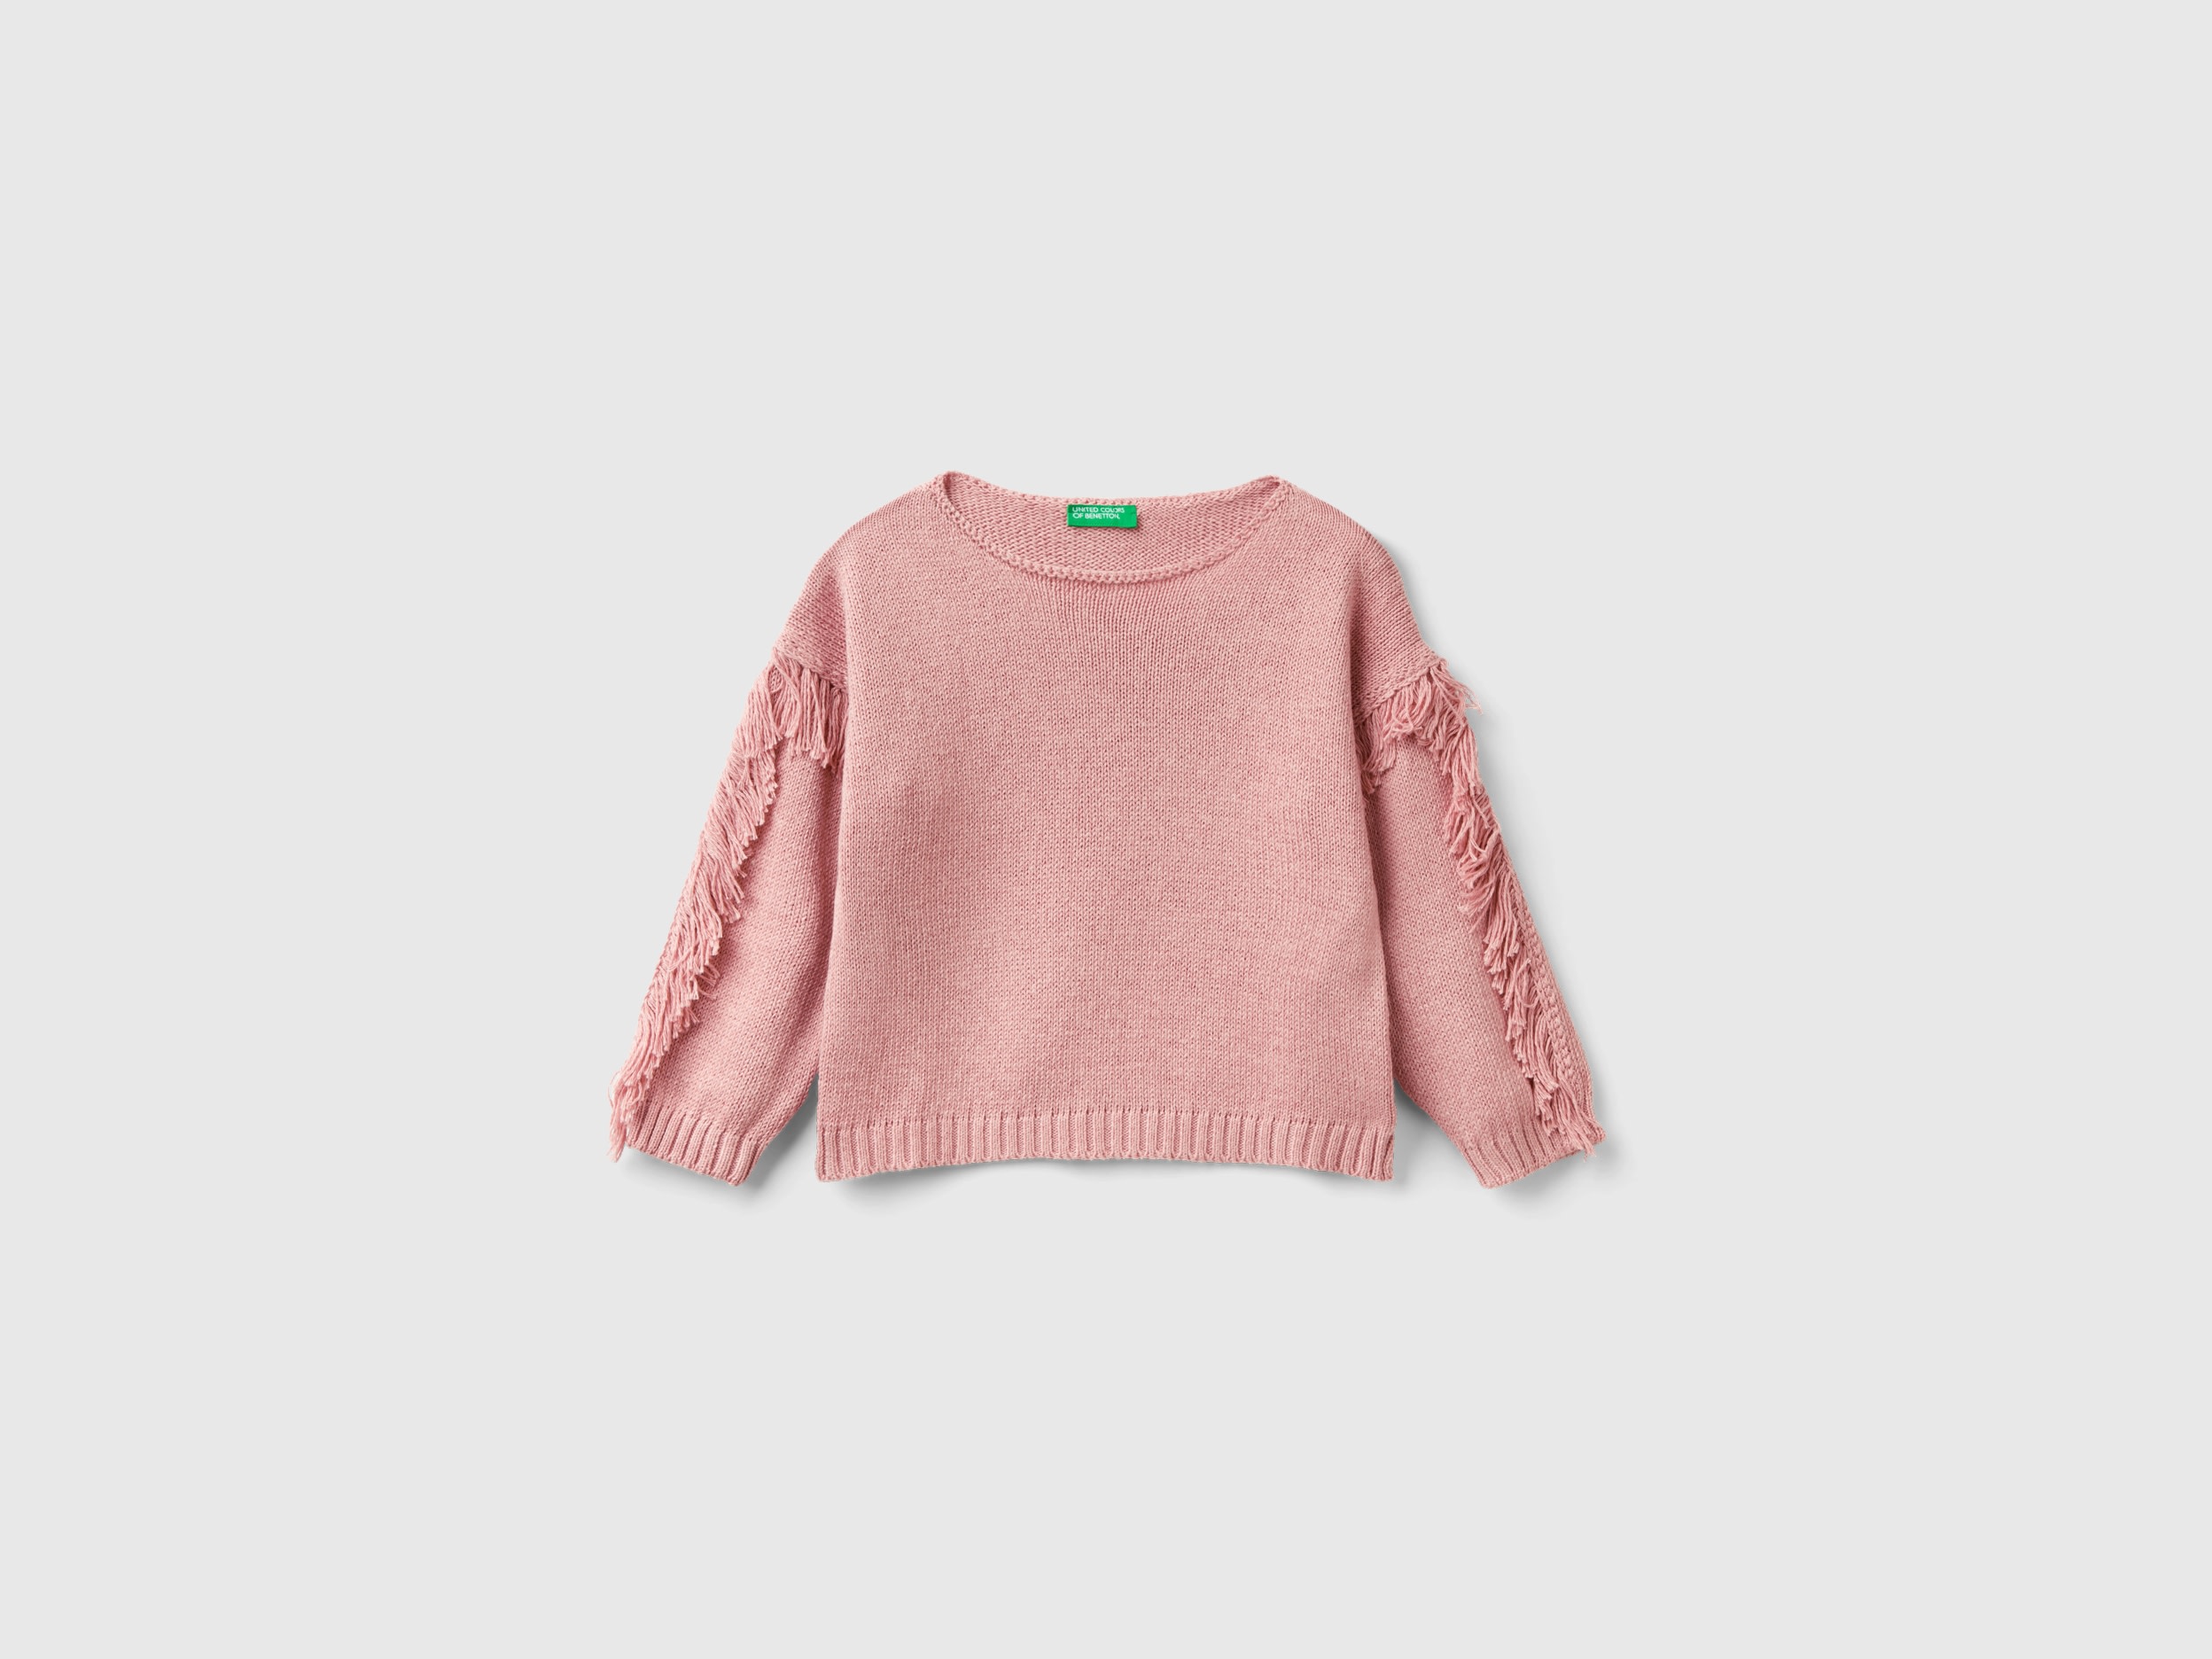 Image of Benetton, Sweater With Fringe, size 110, Pink, Kids